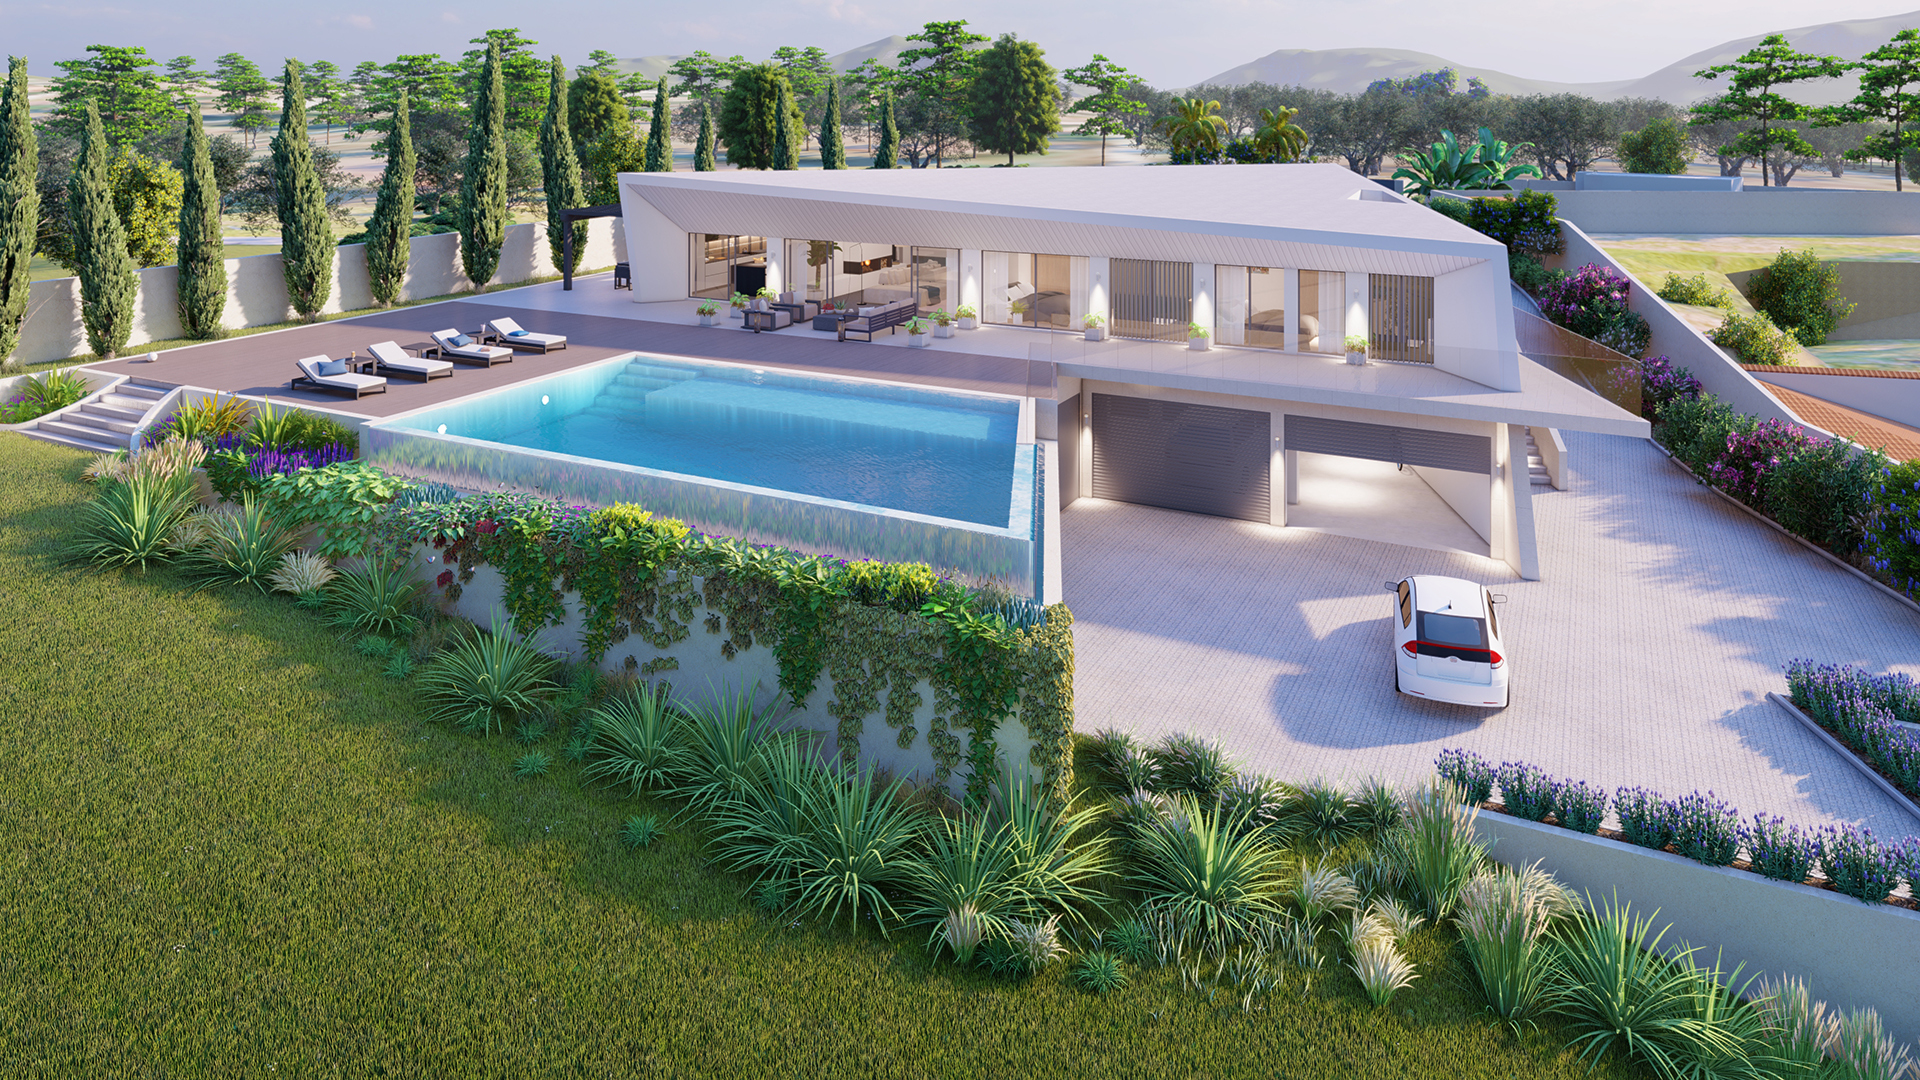 OFF-PLAN - A unique opportunity for an ultra-modern 4 bedroom villa, Faro, Silves | PPP2198 This is a unique opportunity to purchase an ultra-modern 4-bedroom villa.